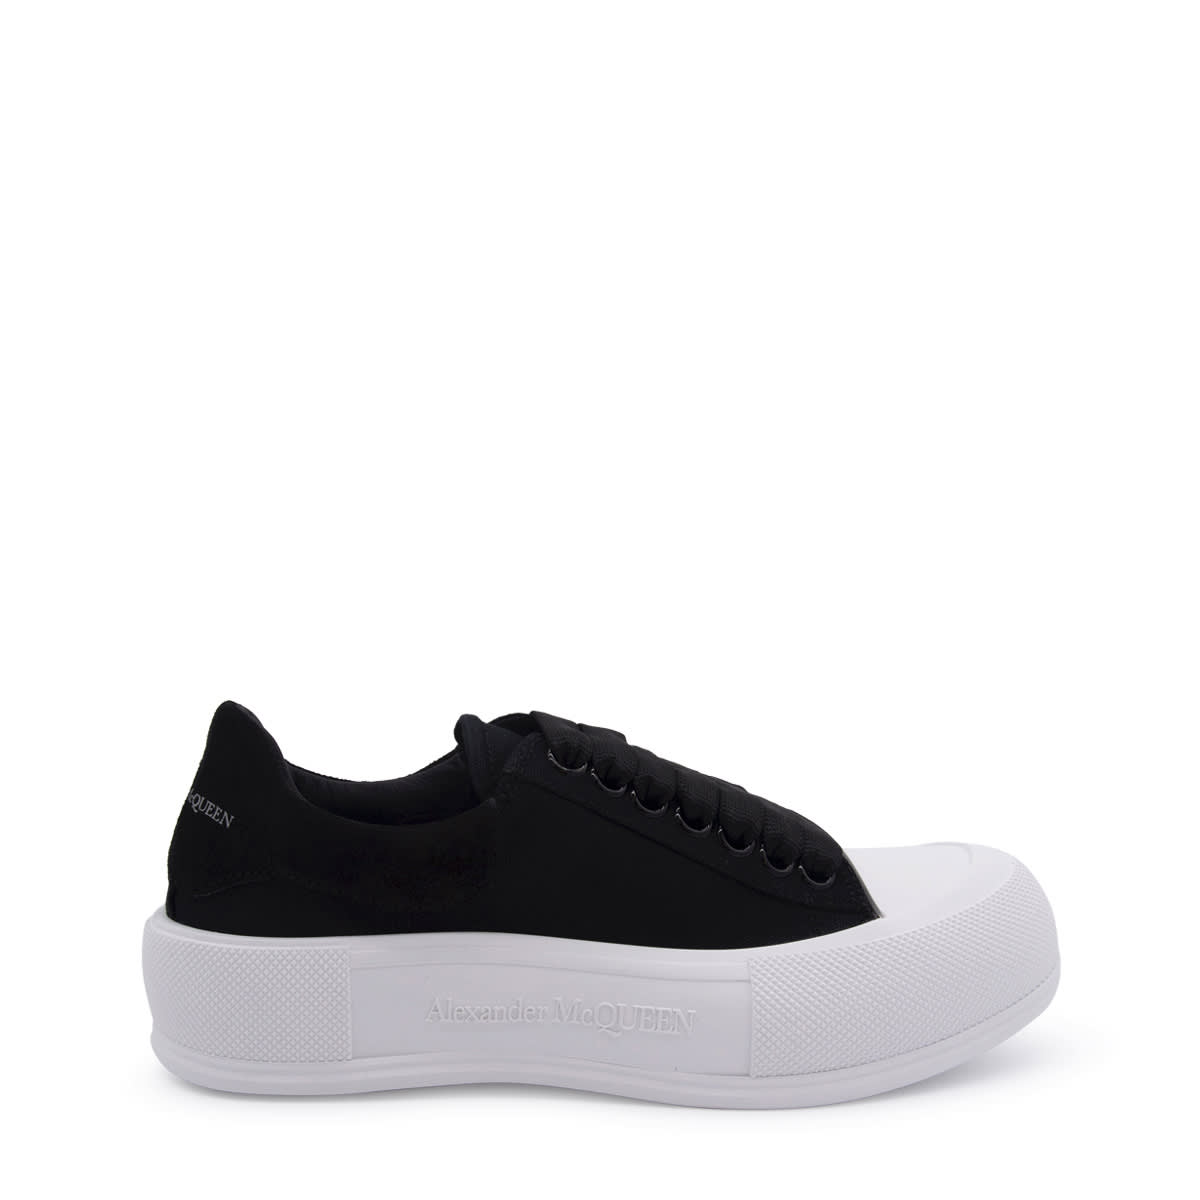 Alexander McQueen Skate Lace Up